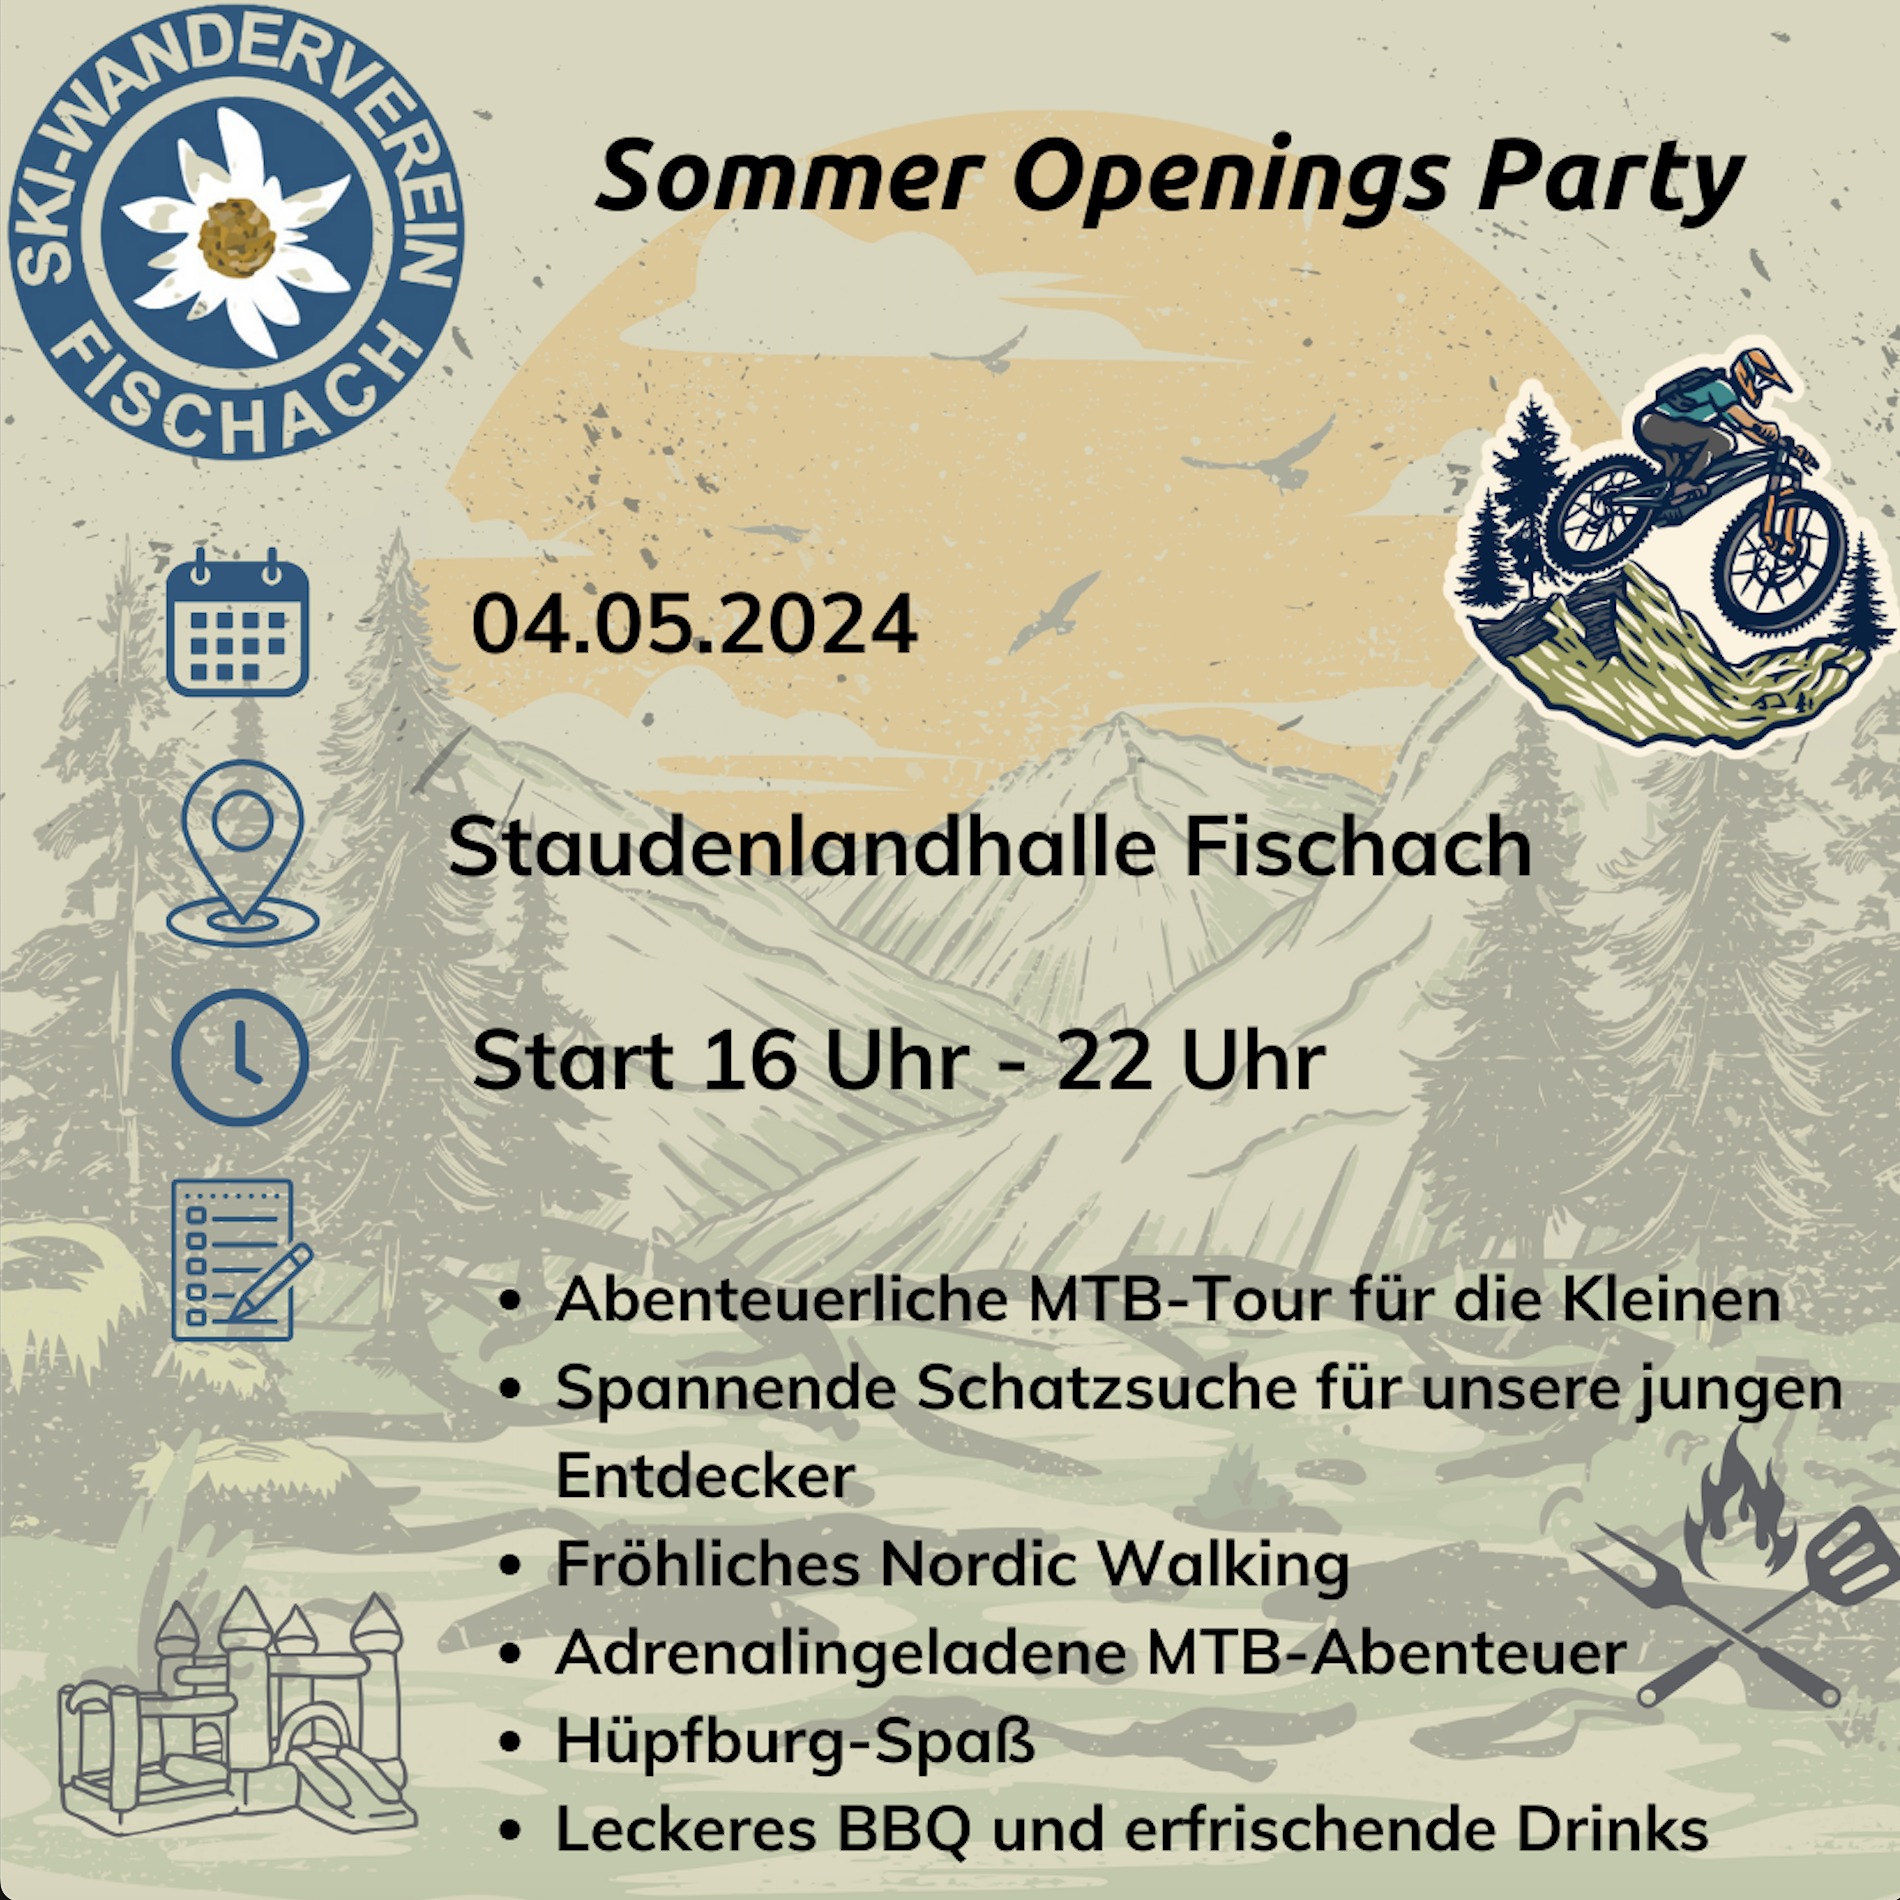 Sommeropeningsparty am 04.05.2024 